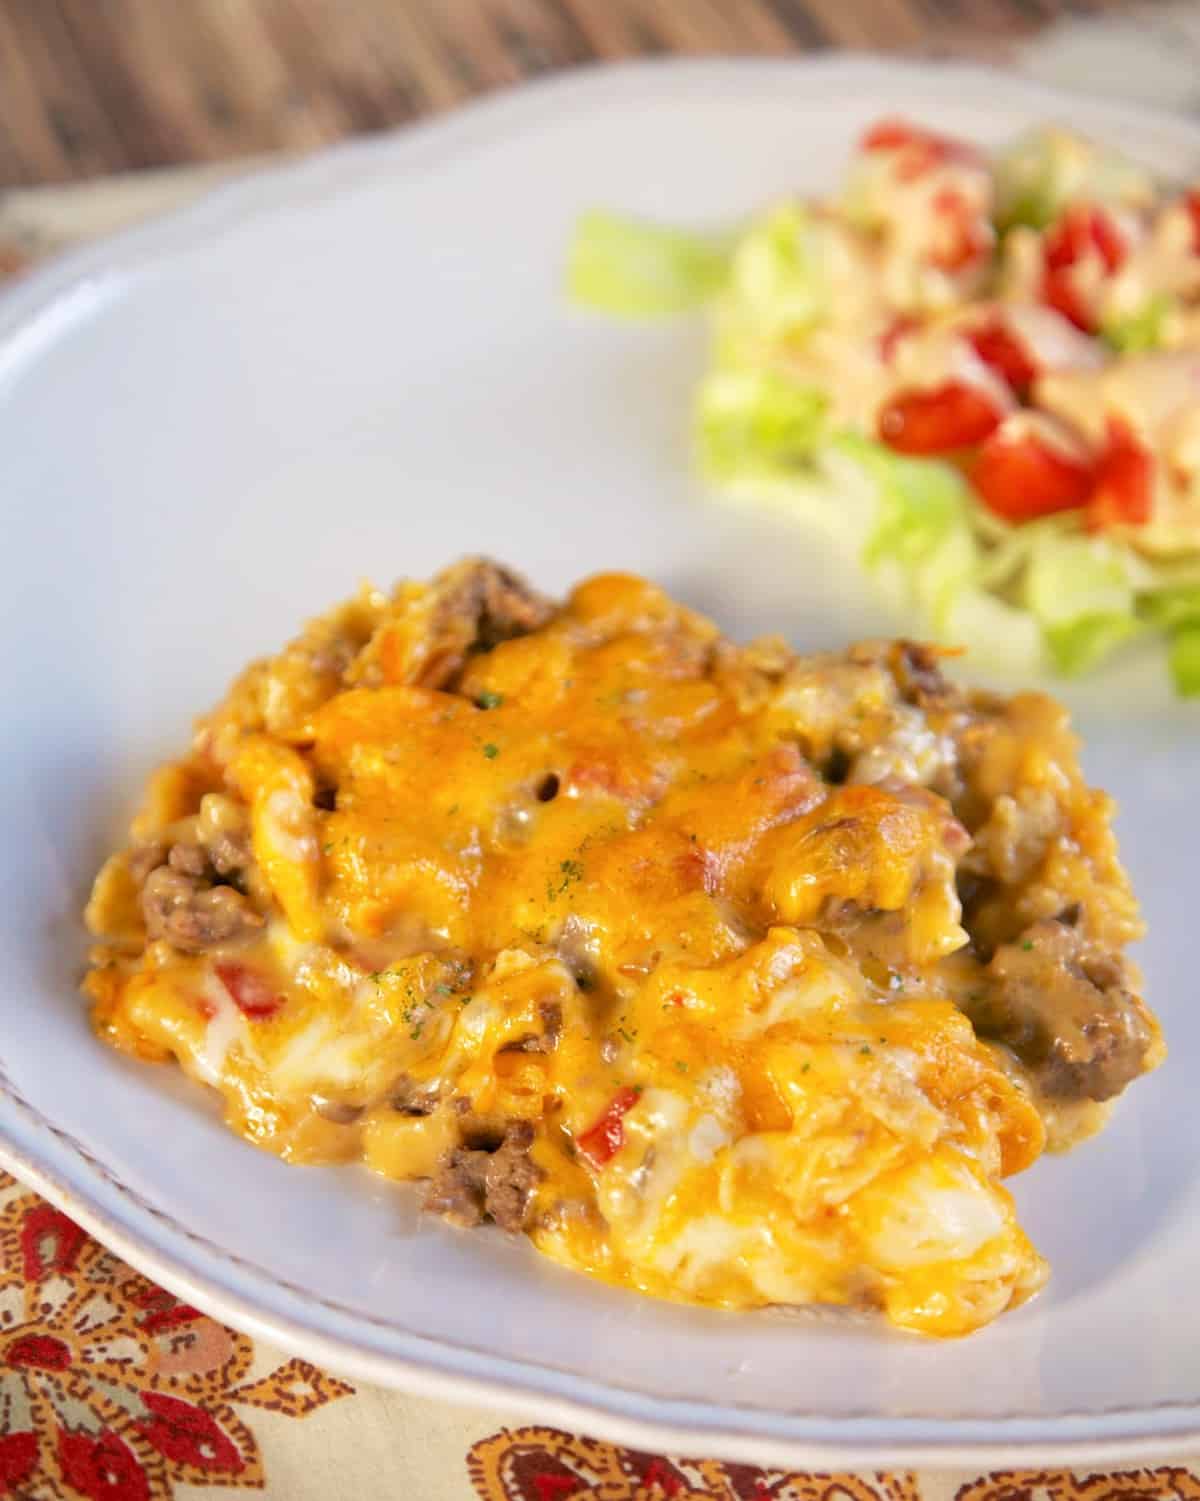 Beefy King Ranch Casserole - tortilla chips, Rotel, meat & cheese = DELICIOUS! The whole family cleaned their plates! Hamburger, taco seasoning, cream of chicken, cream of mushroom, onion, Rotel, Cheez Whiz, hot sauce, worcestershire, tortilla chips, cheddar and mozzarella cheese. Can make ahead of time and refrigerate or freeze. Ready in about 30 minutes. SO delicious!